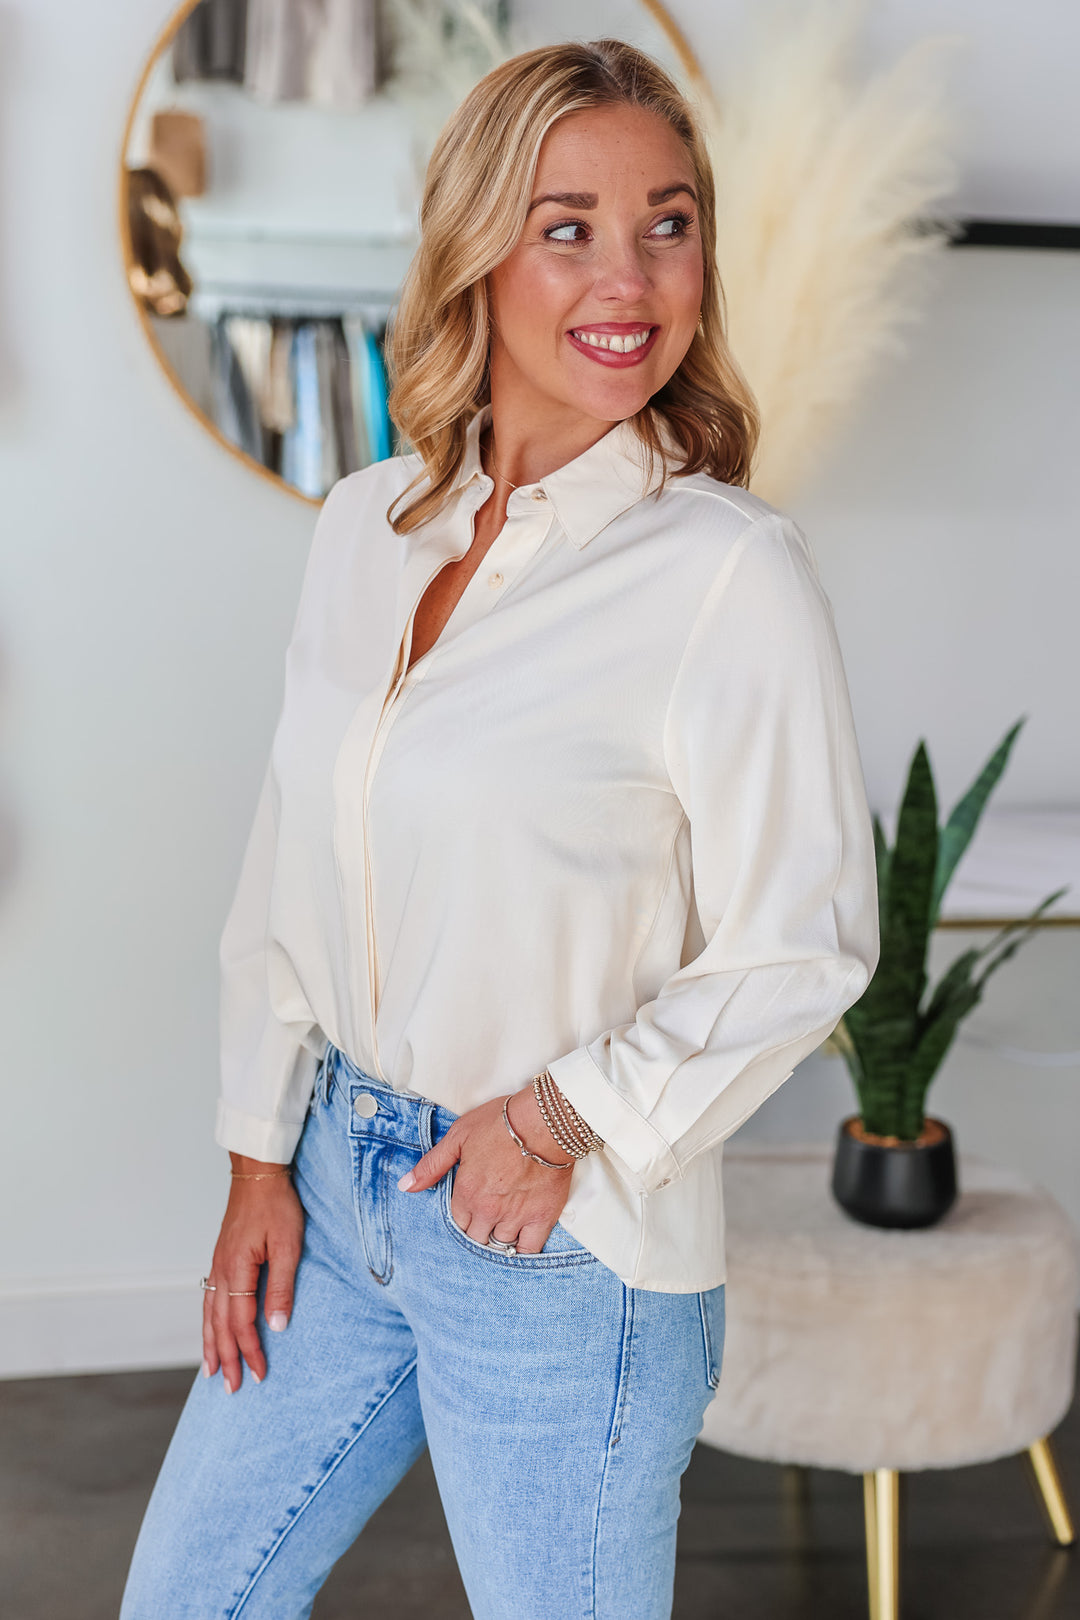 A blonde woman standing in a shop wearing a cream colored button down with blue jeans.